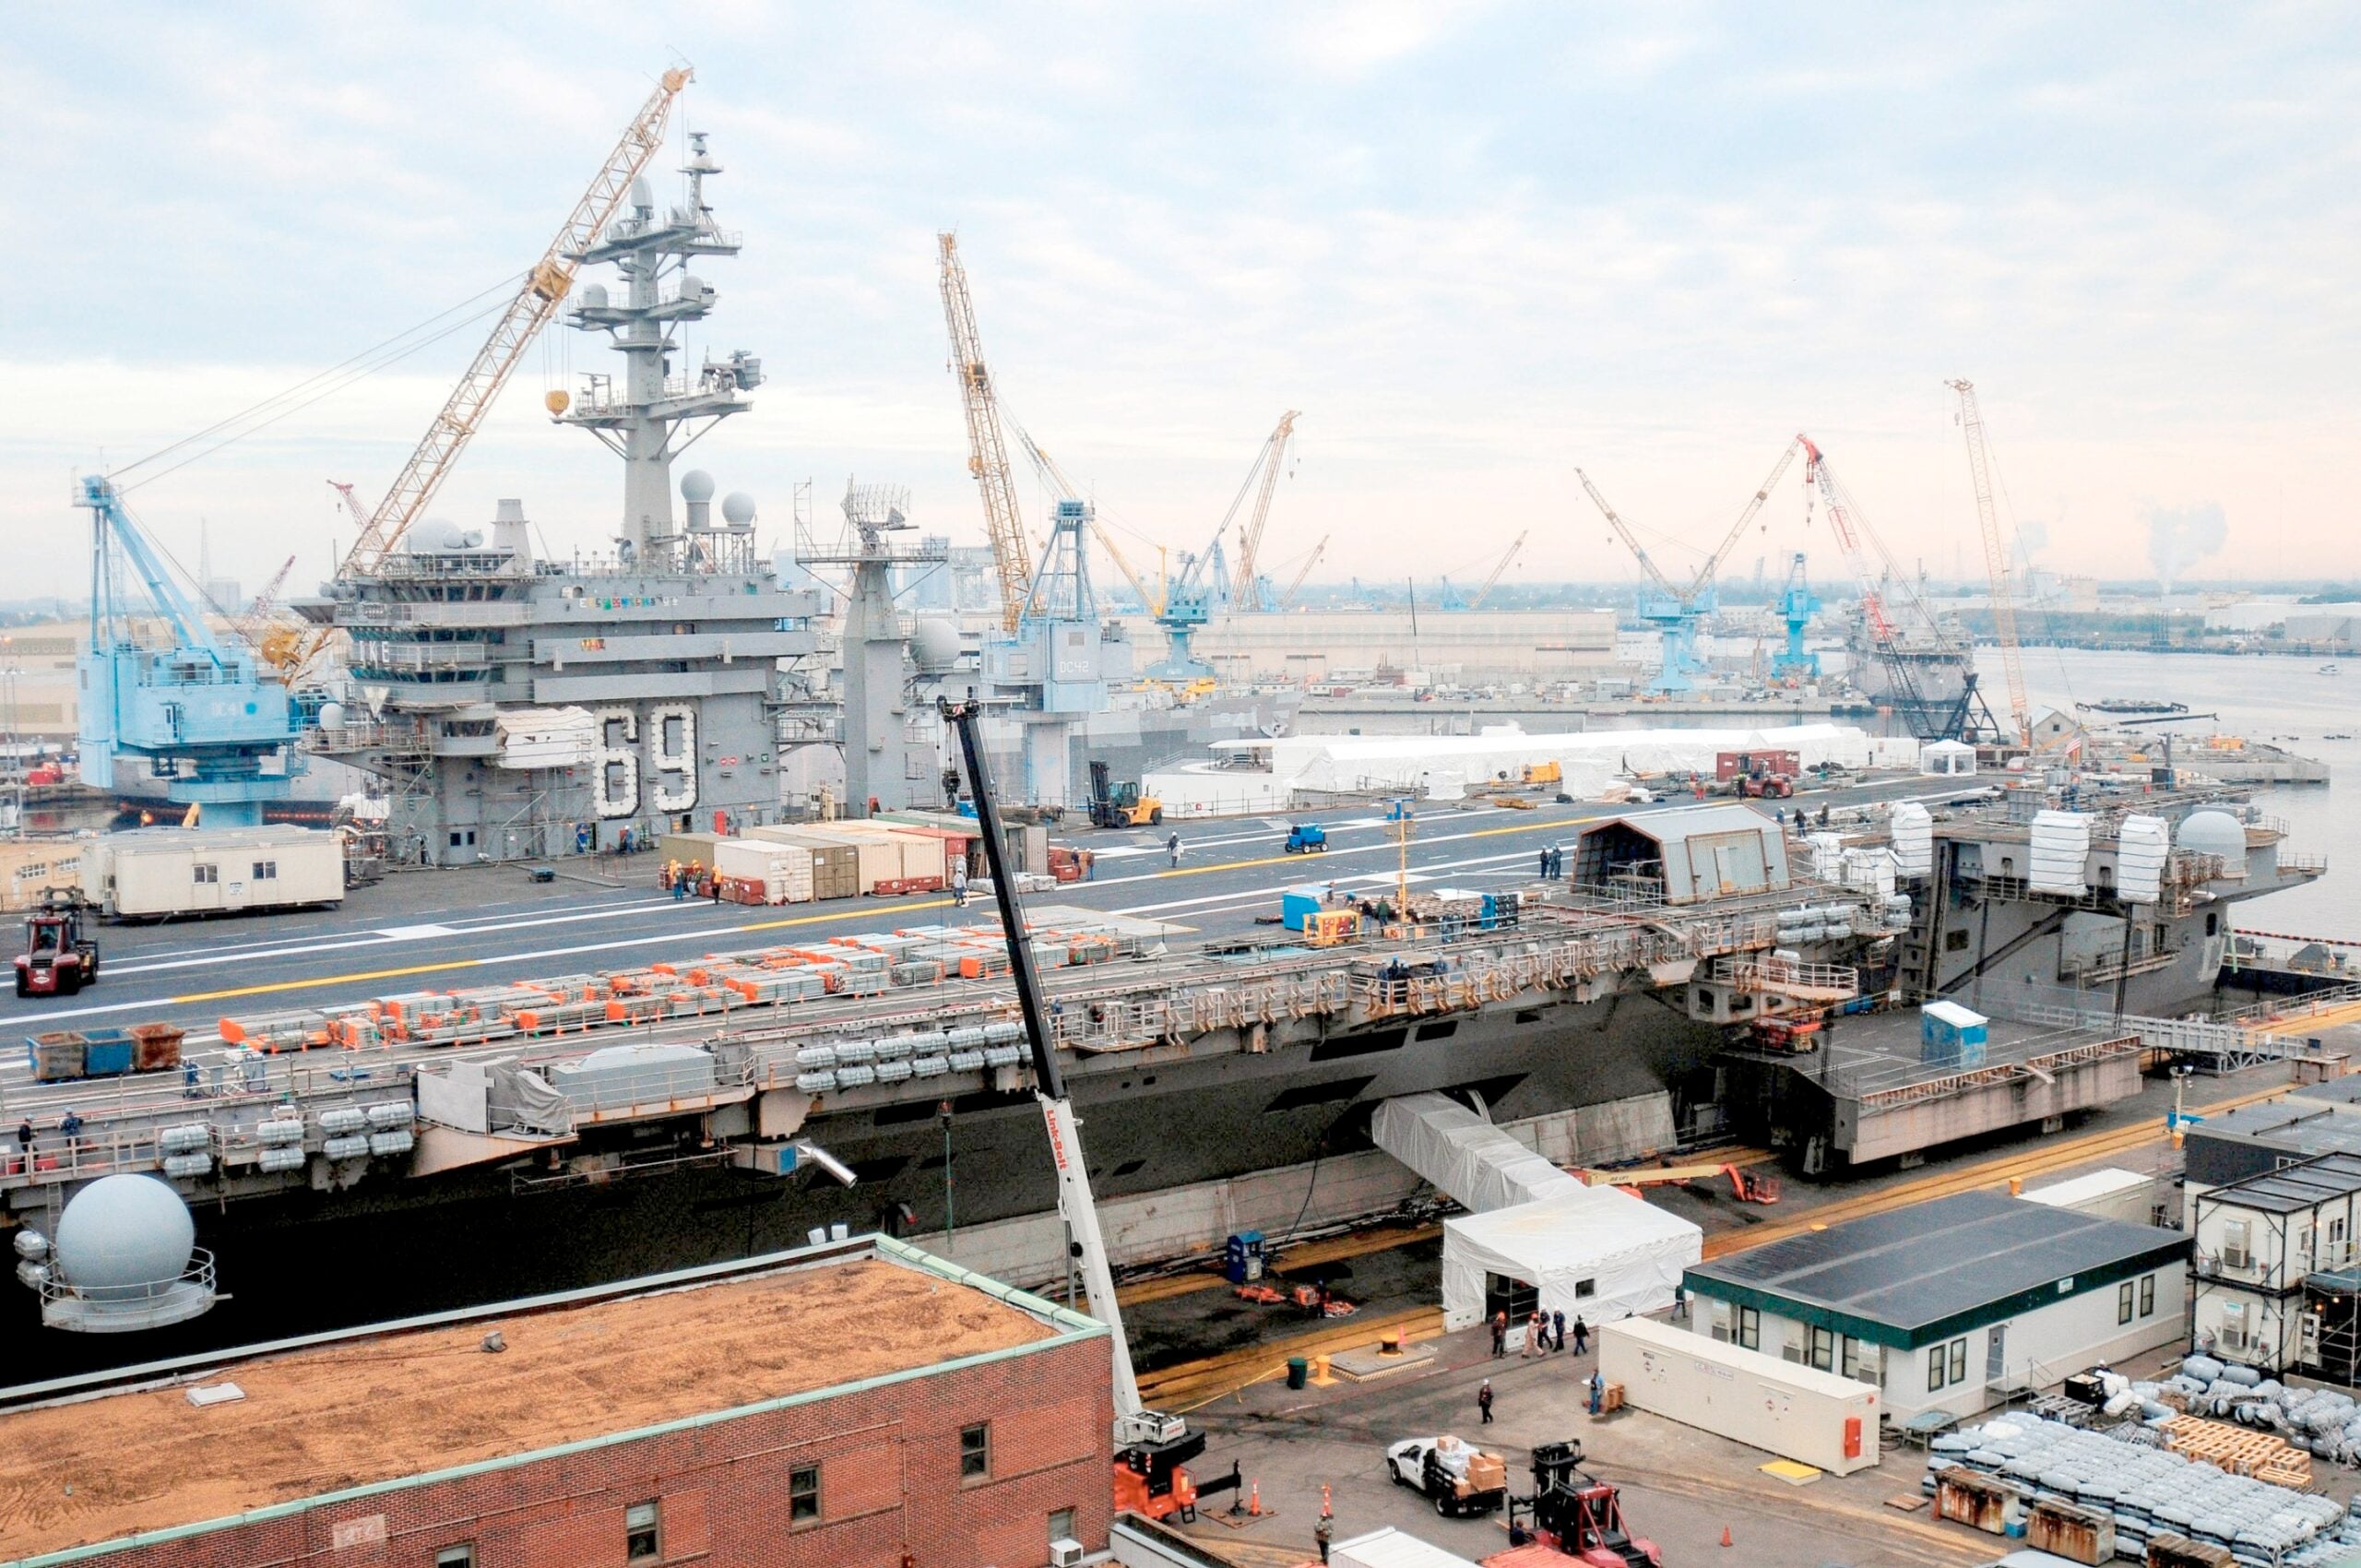 The aircraft carrier USS Dwight D. Eisenhower (CVN 69) sits in dry dock during a 14-month scheduled docking planned incremental availability at Norfolk Naval Shipyard. (U.S. Navy photo by Mass Communication Specialist Seaman Wesley J. Breedlove/Released)